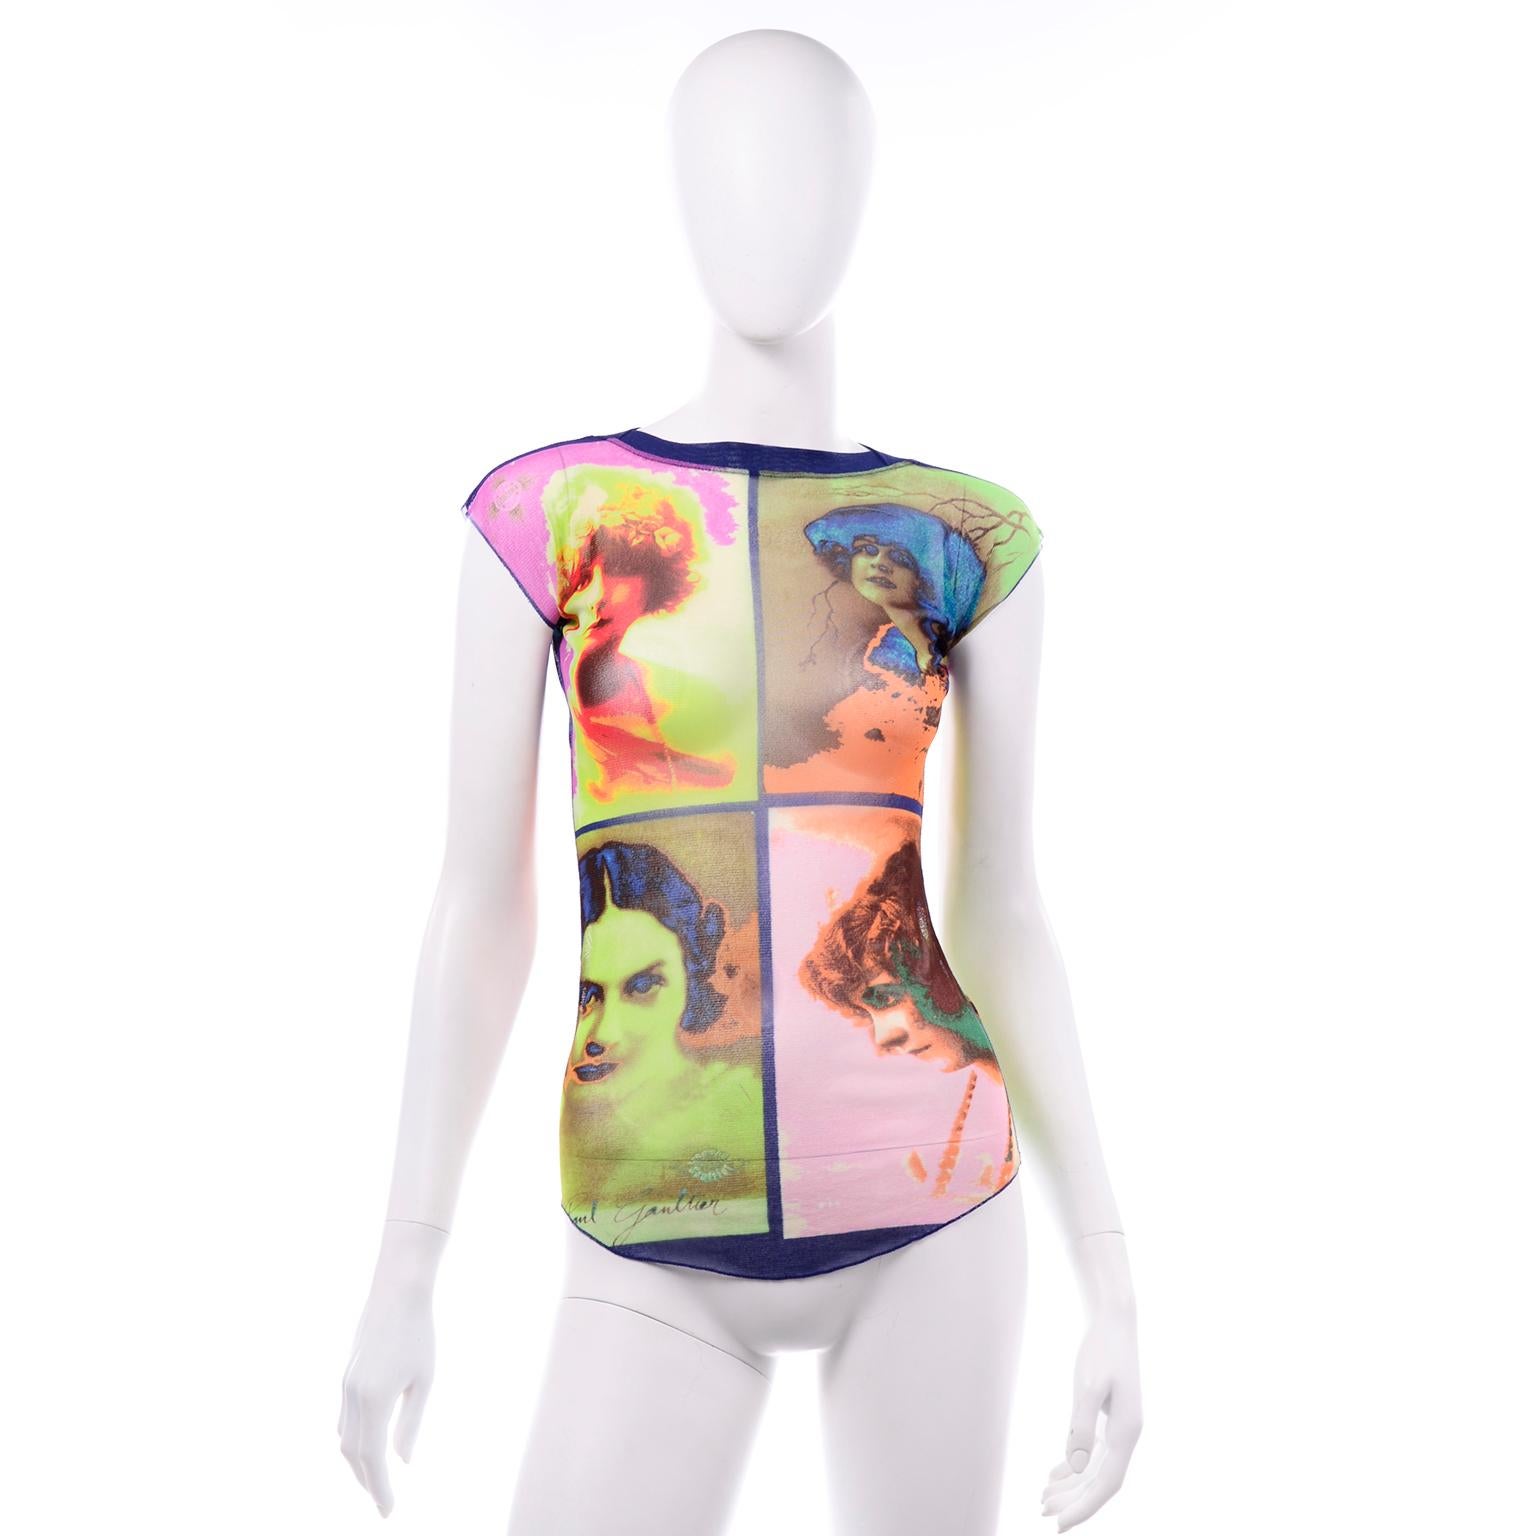 This is such an incredible vintage 1990's Jean Paul Gaultier top! This iconic, pop art style vintage top has various 1920s printed female headshot portraits on a lightweight mesh. The women in the portraits are presented in highly saturated colors.